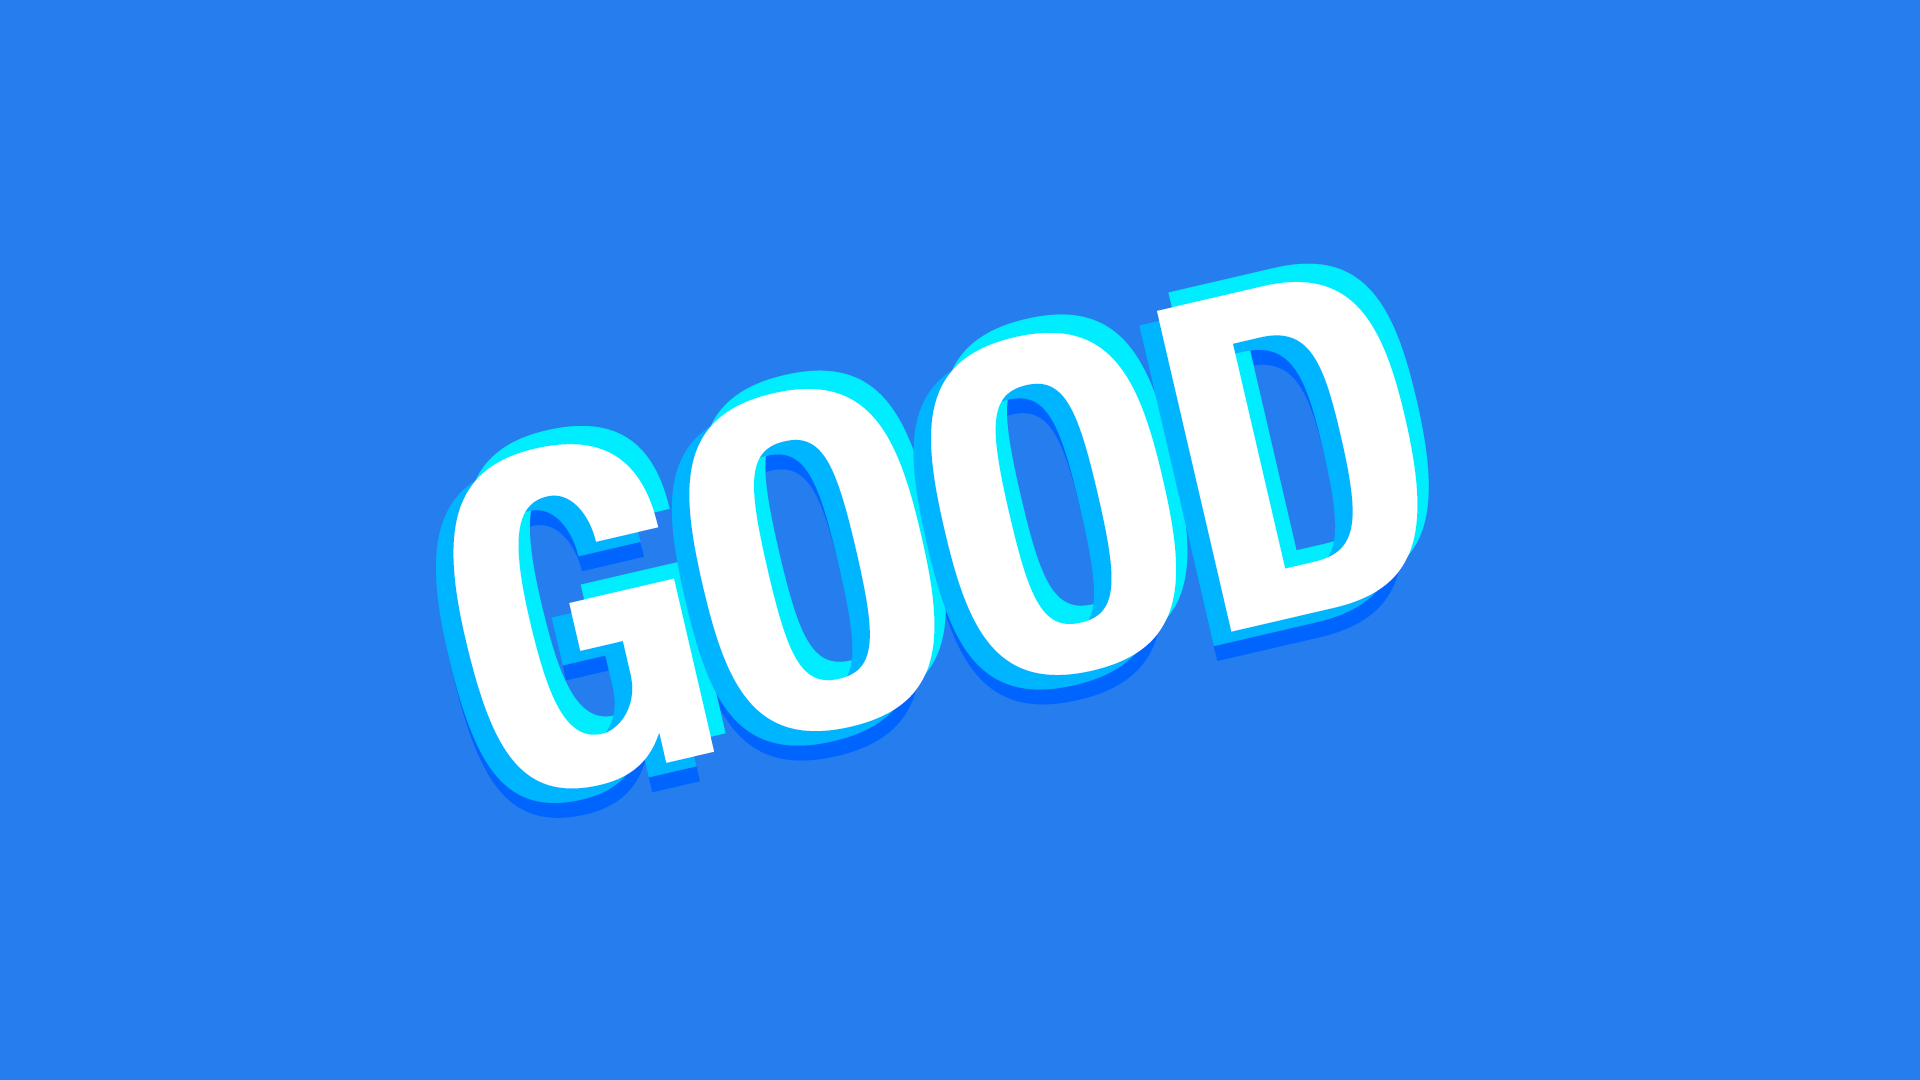 Icon for It's All Good!